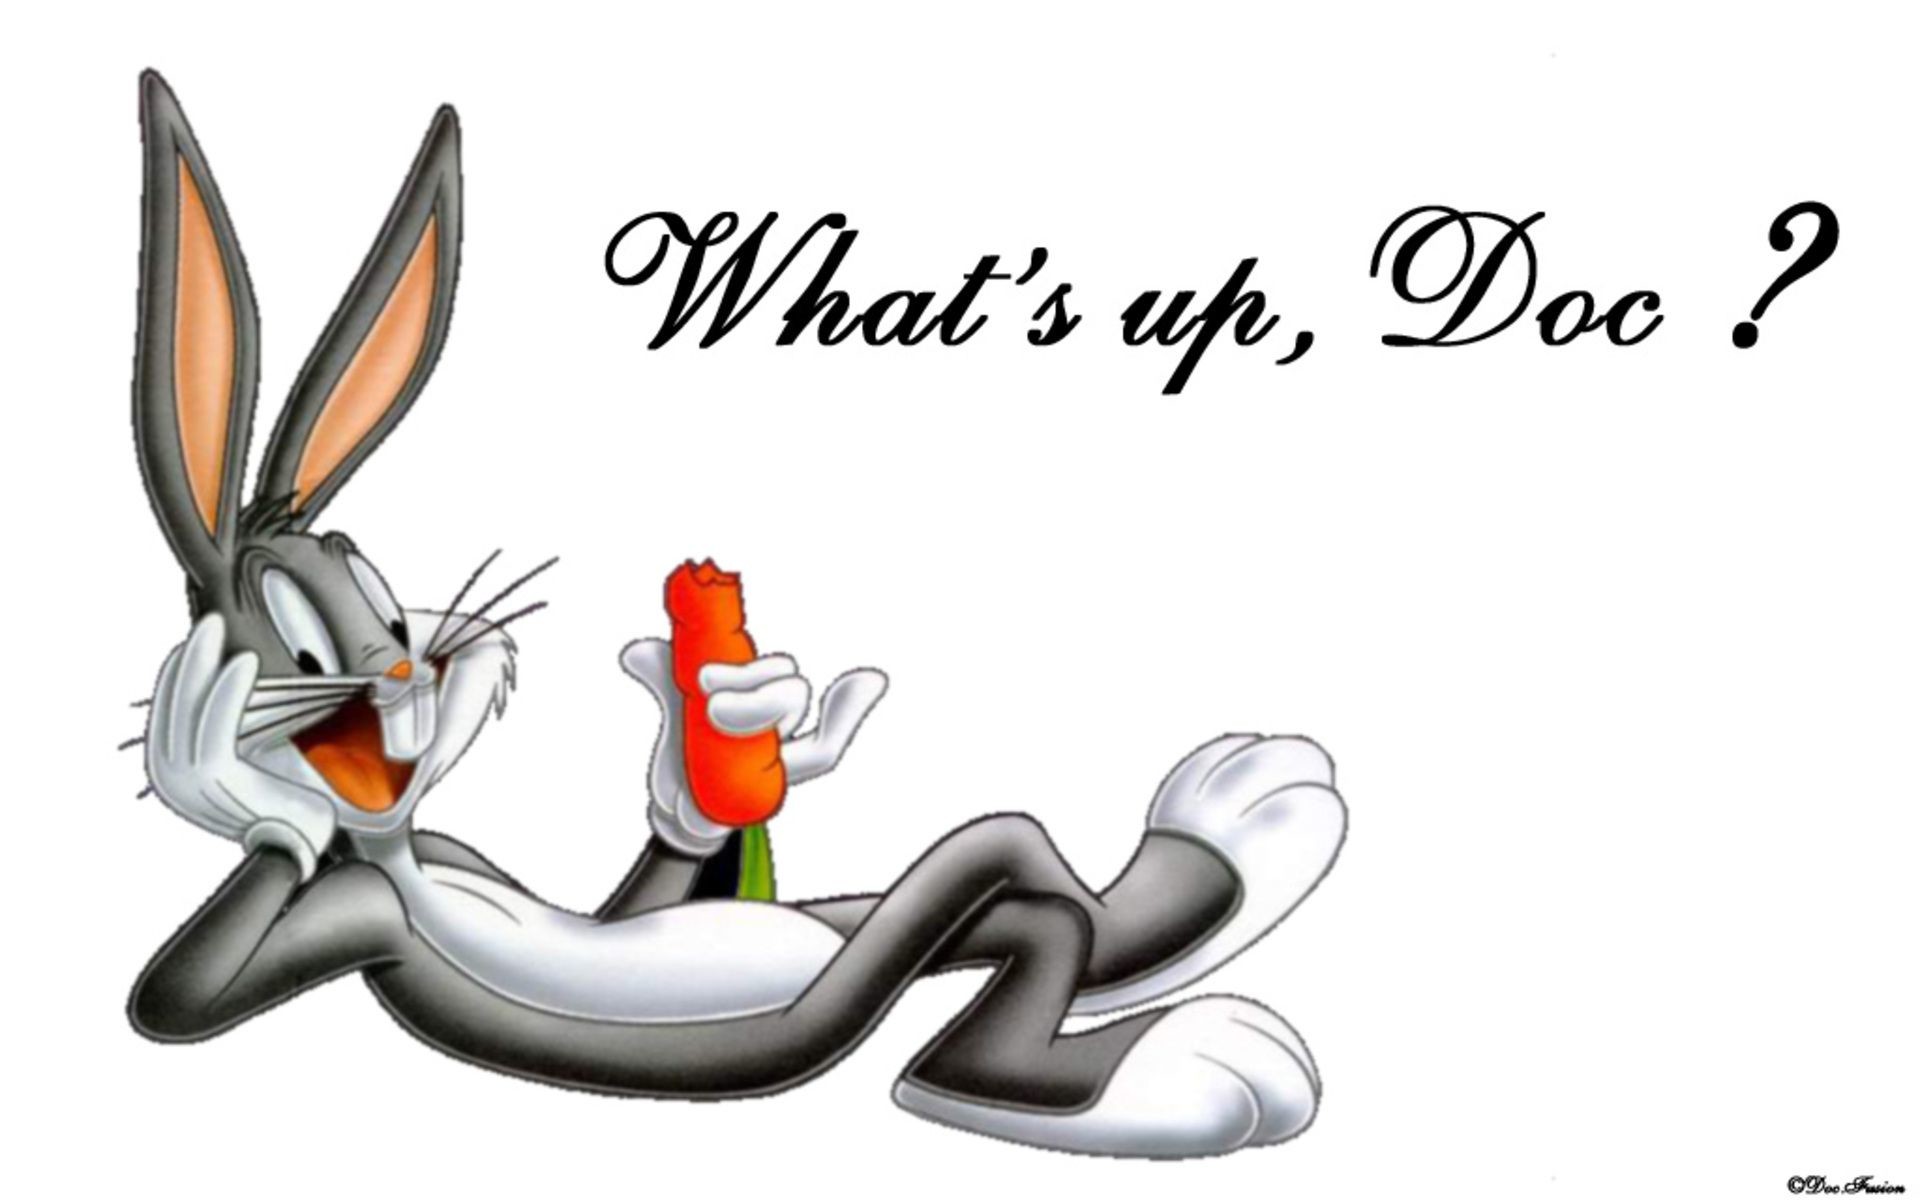 1920x1200 Explore and share Looney Toons Wallpapers on WallpaperSafari